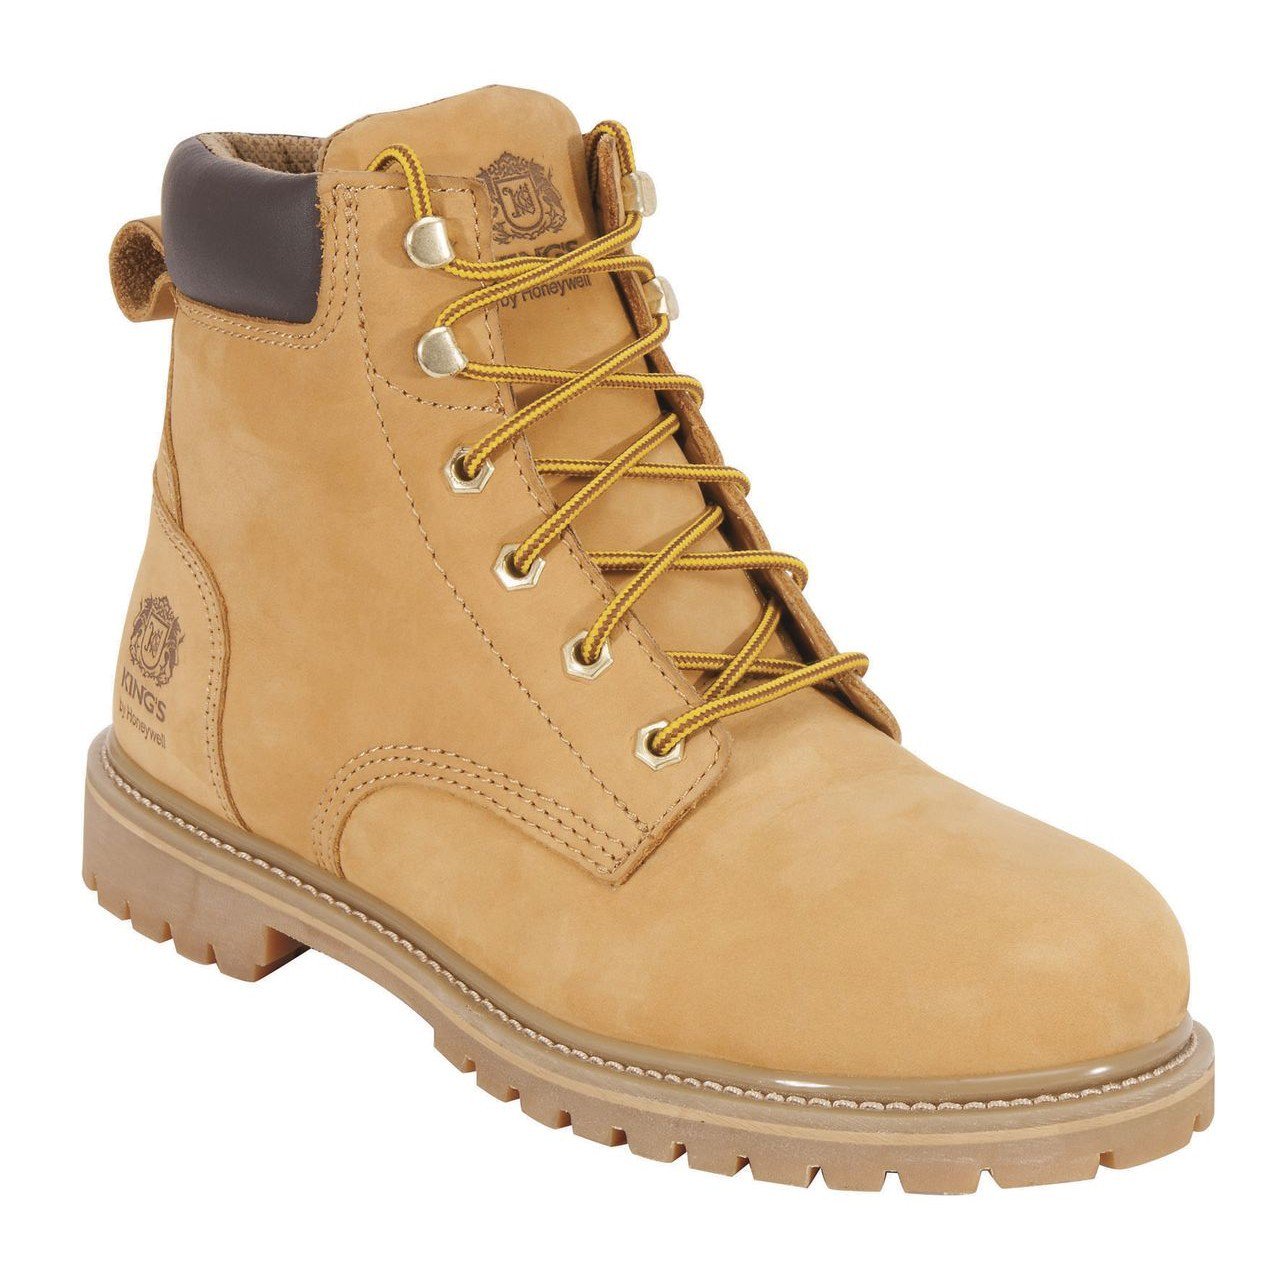 safety work boots on sale